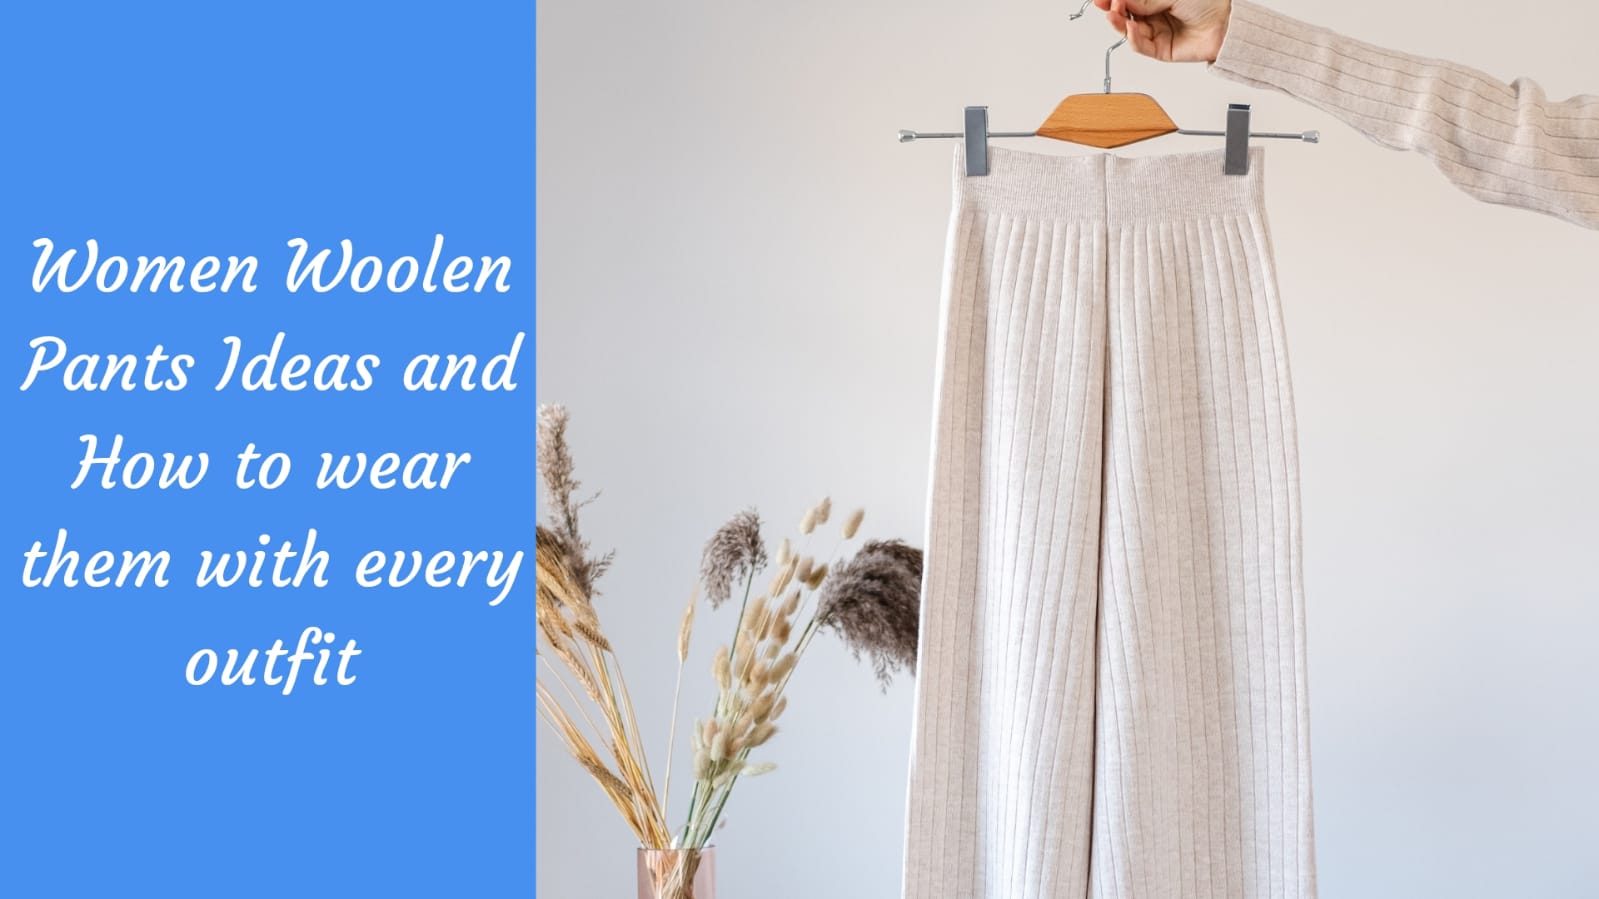 Women Woolen Pants Ideas And How To Wear Them With Every Outfit